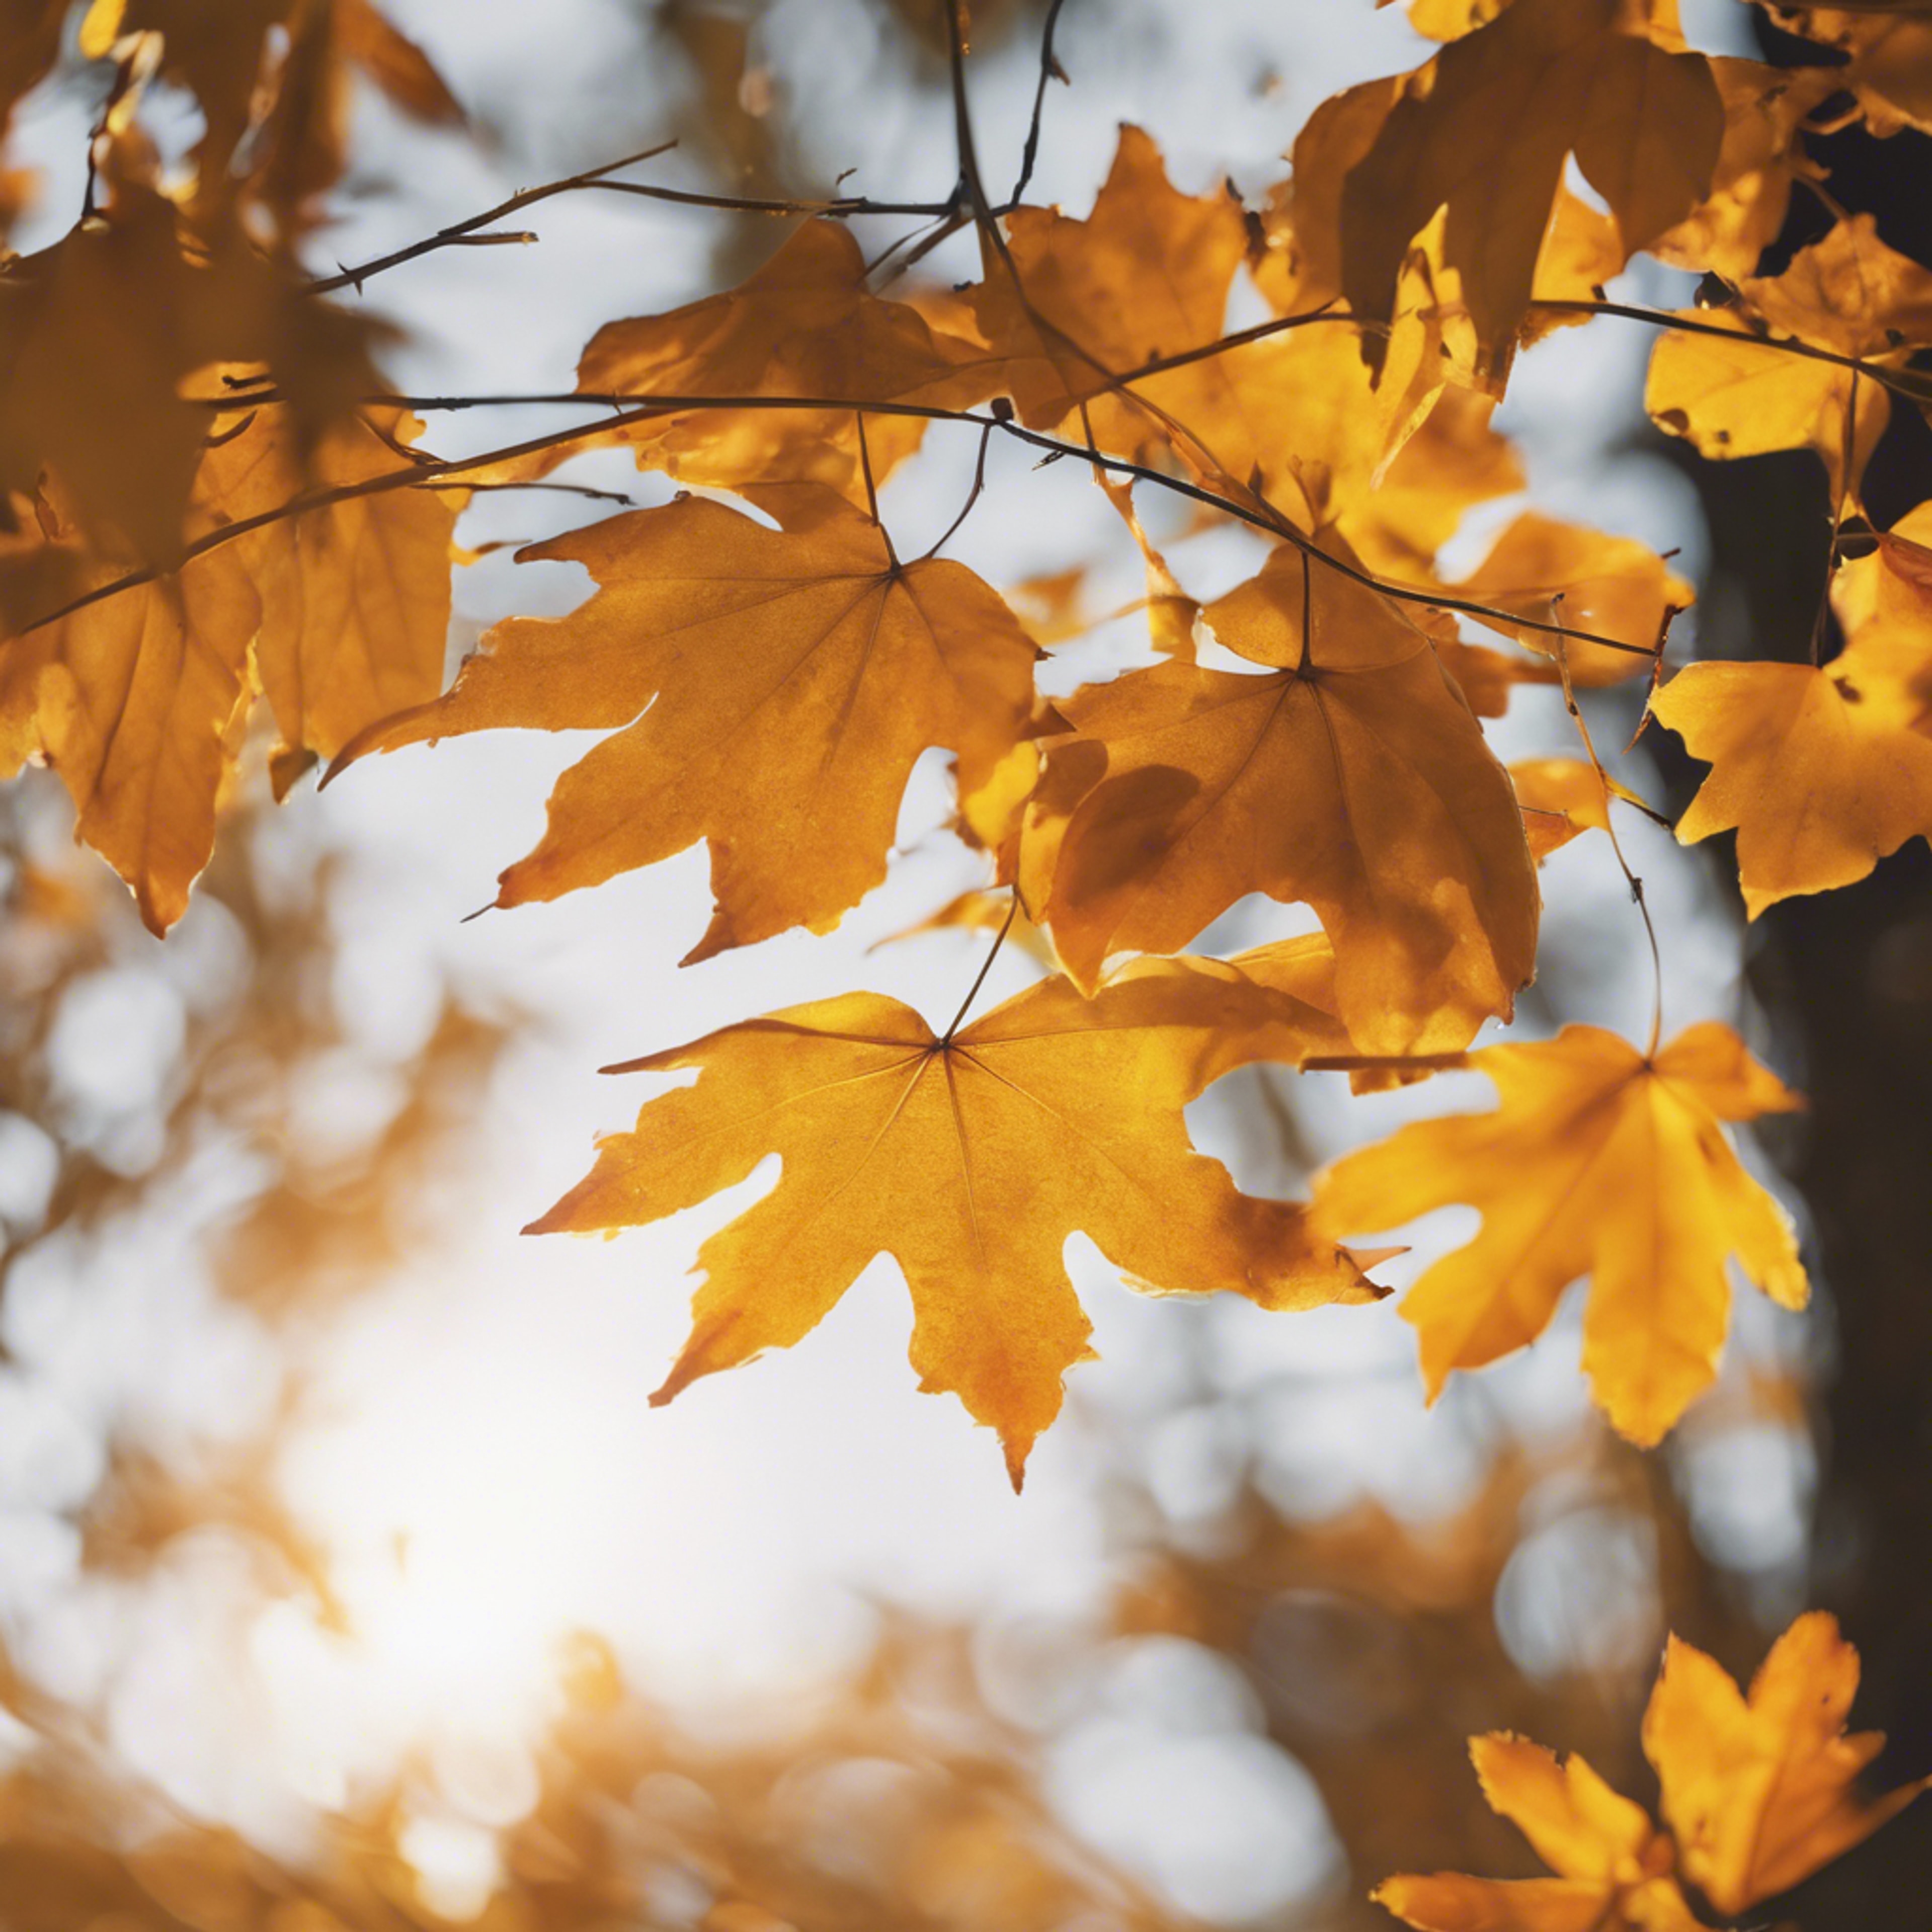 A close look at yellow-orange fall leaves, with the light streaming through. Tapeta[f7b27726e627433697dc]